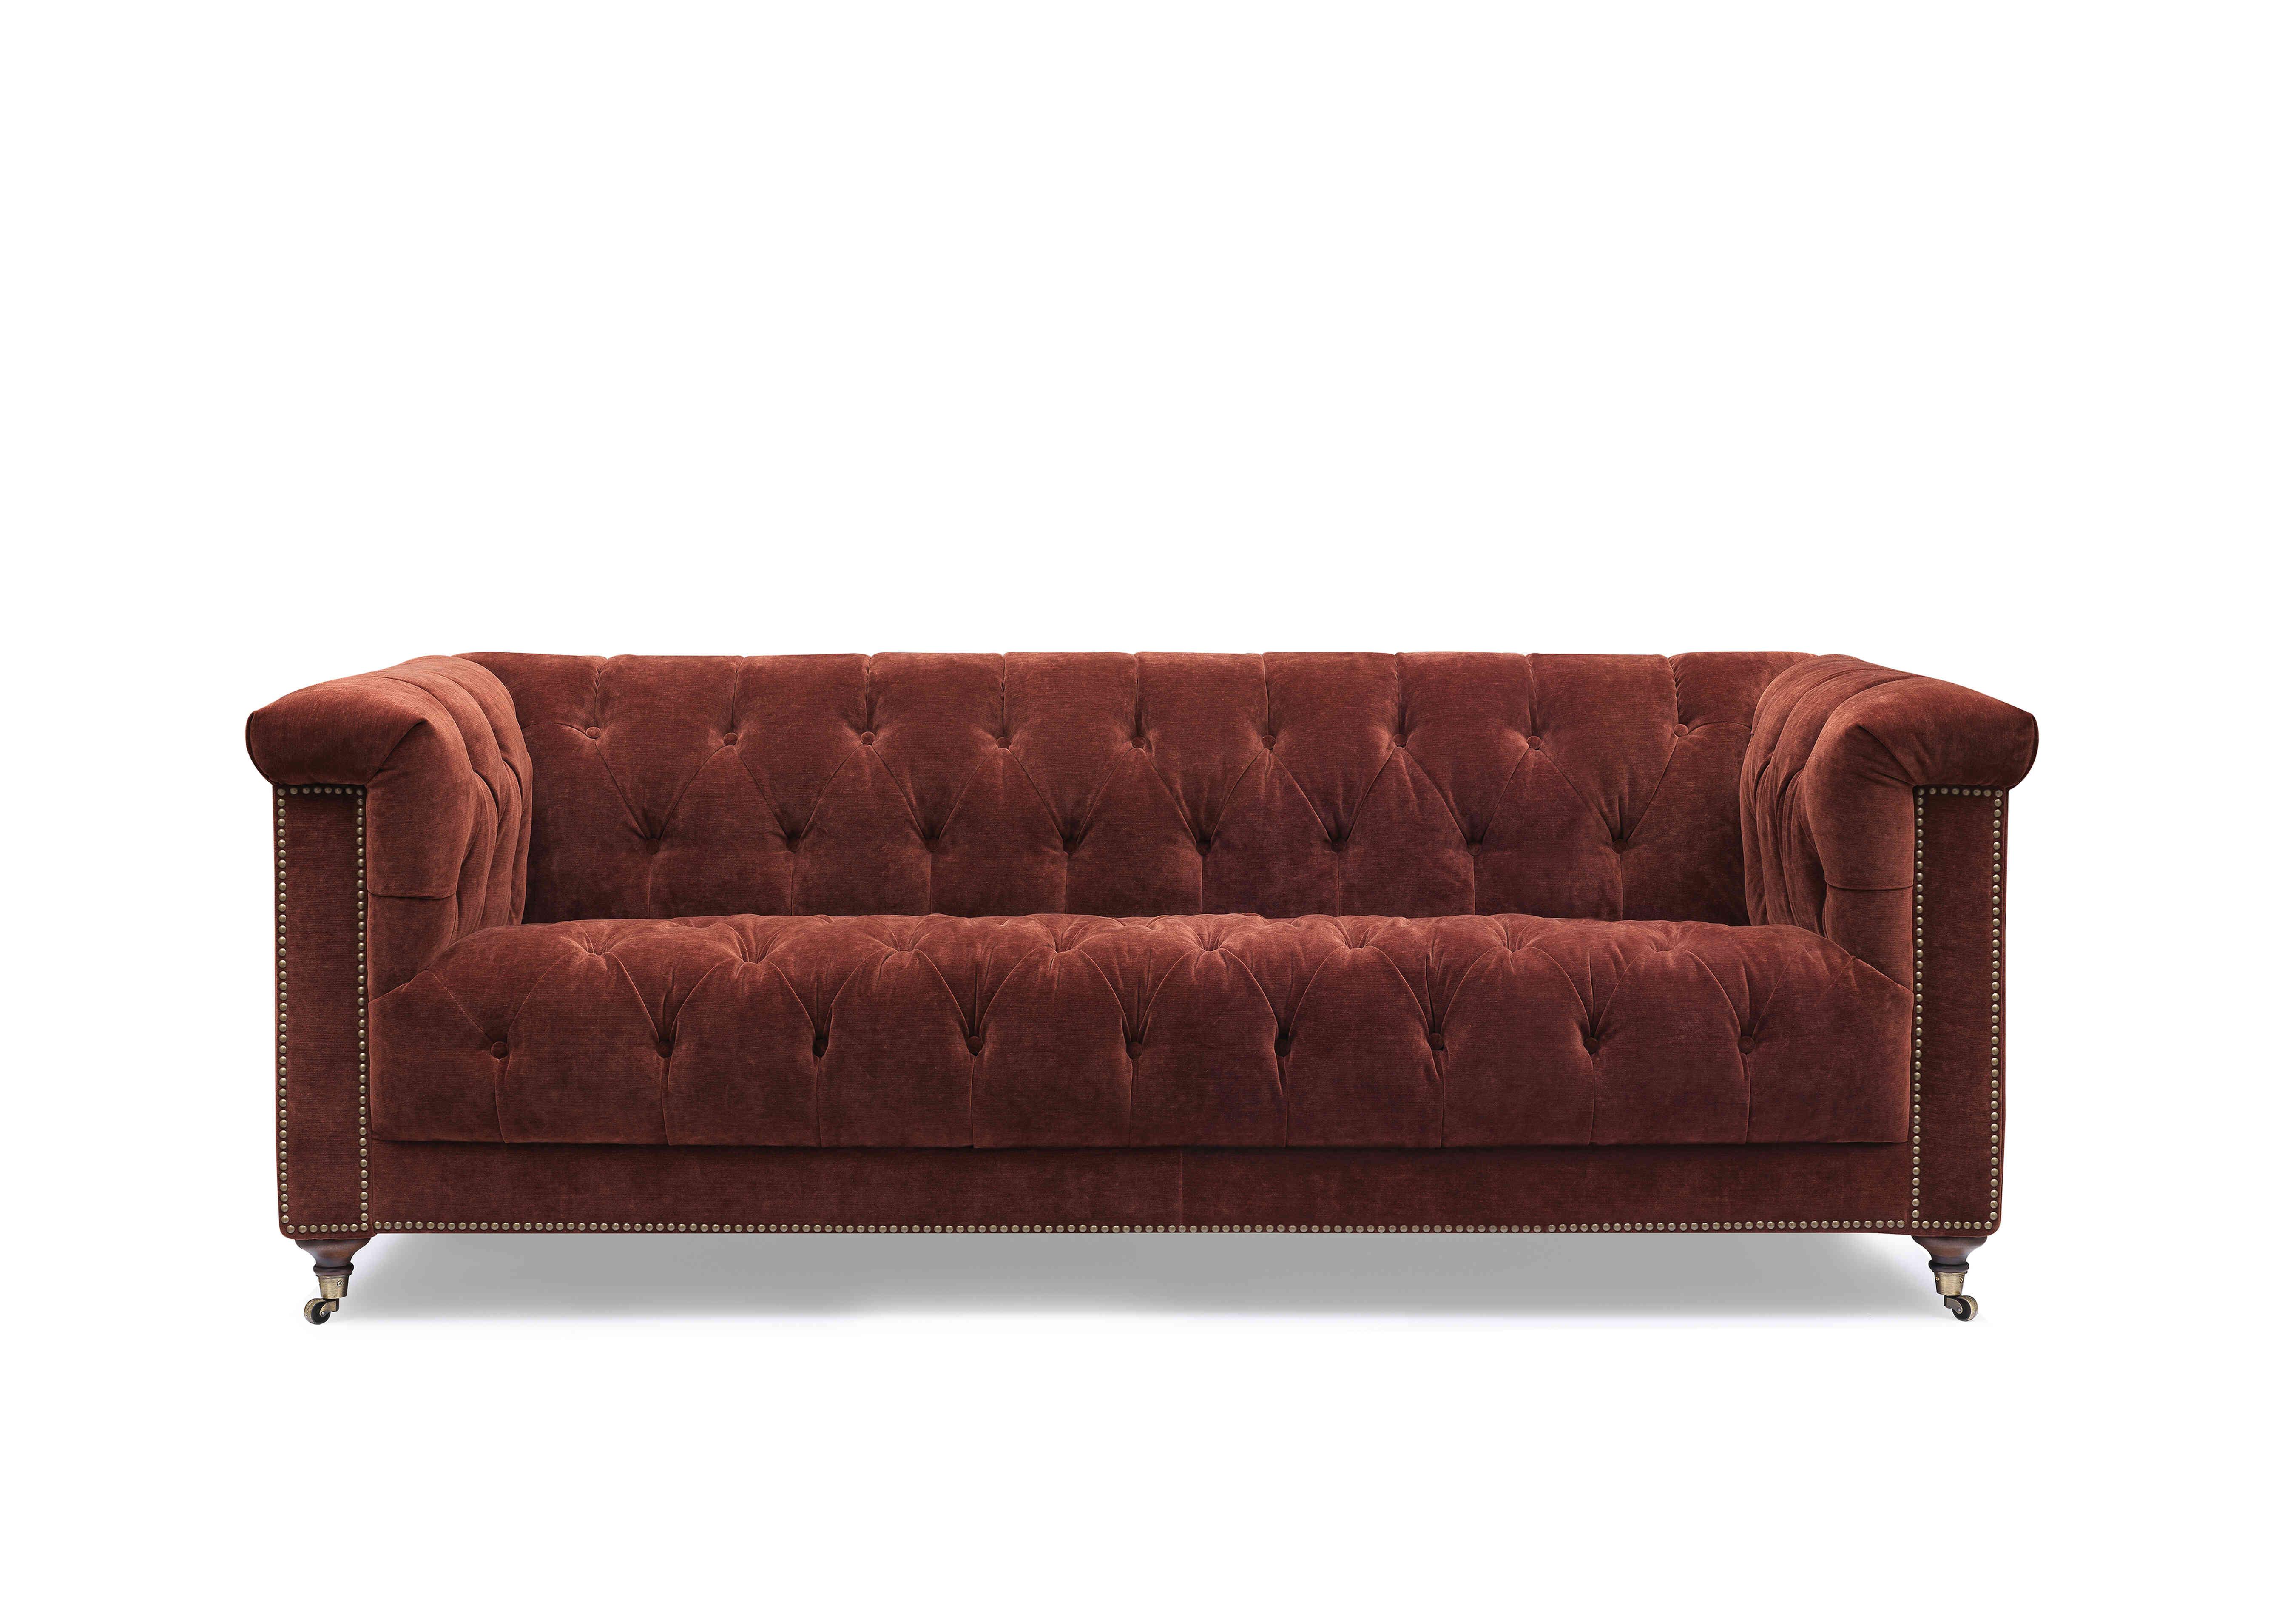 Wallace 3 Seater Fabric Chesterfield Sofa in X3y1-W019 Tawny on Furniture Village